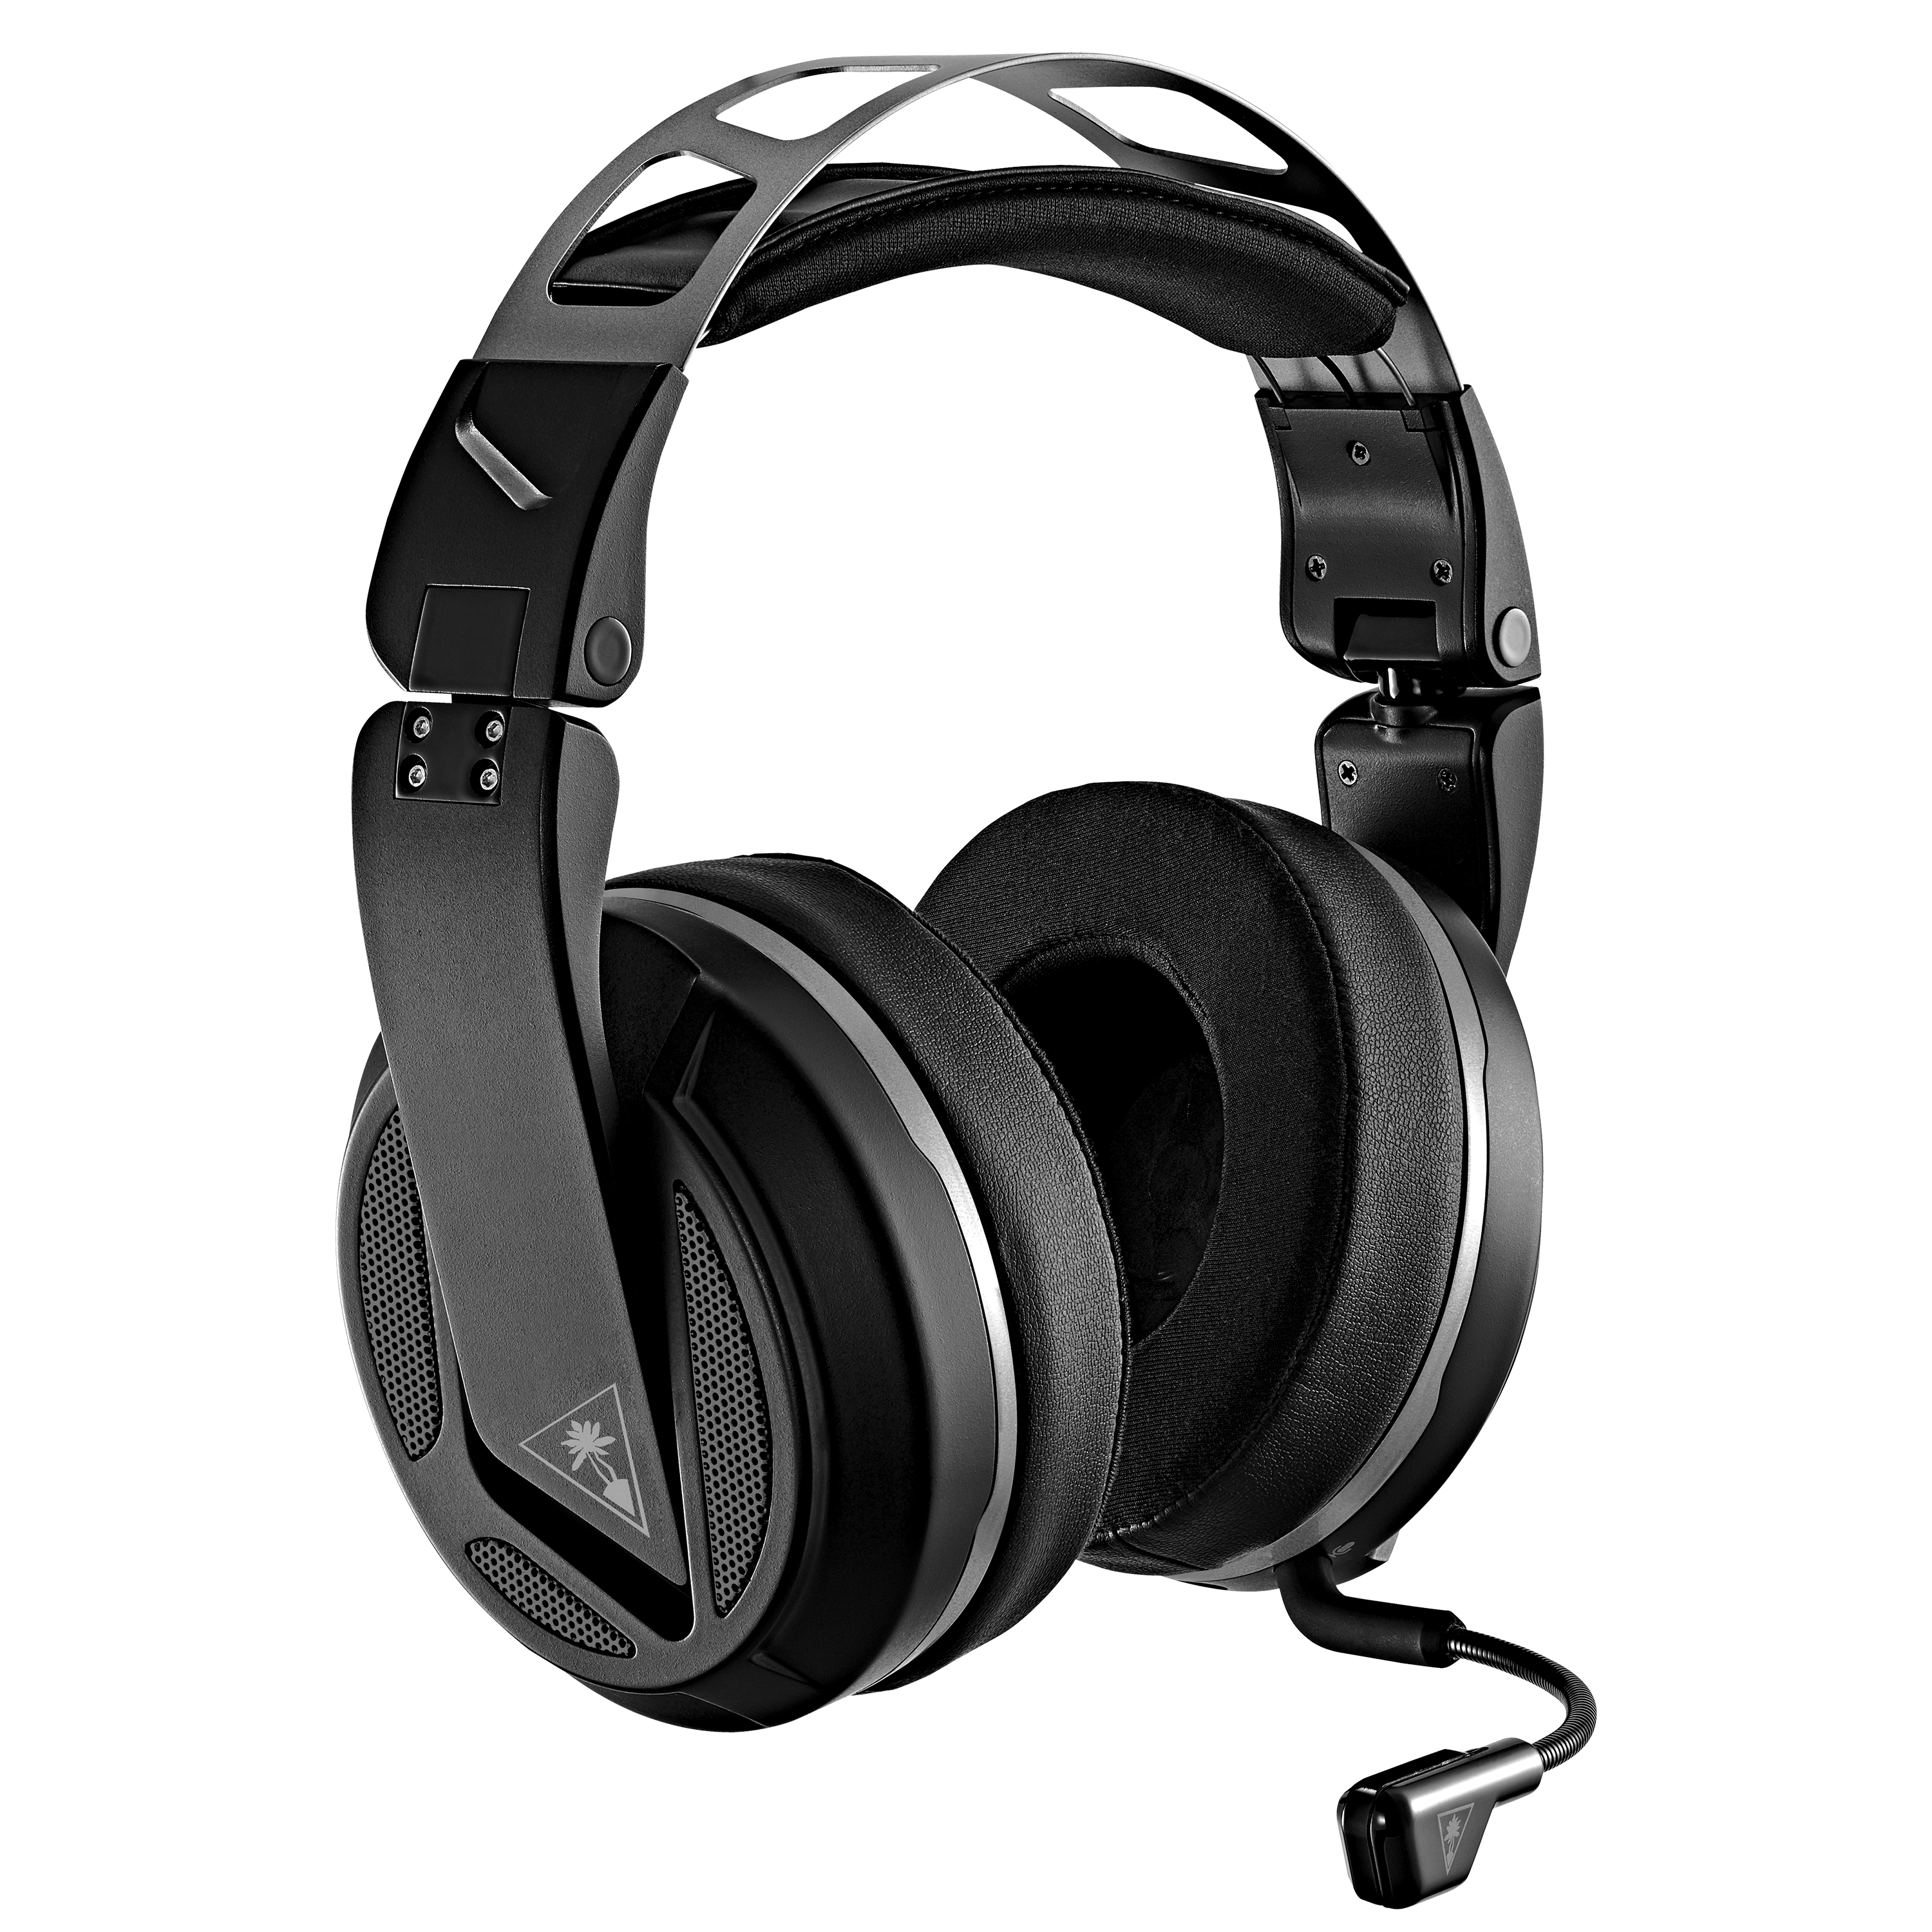 wireless headphones with mic for pc